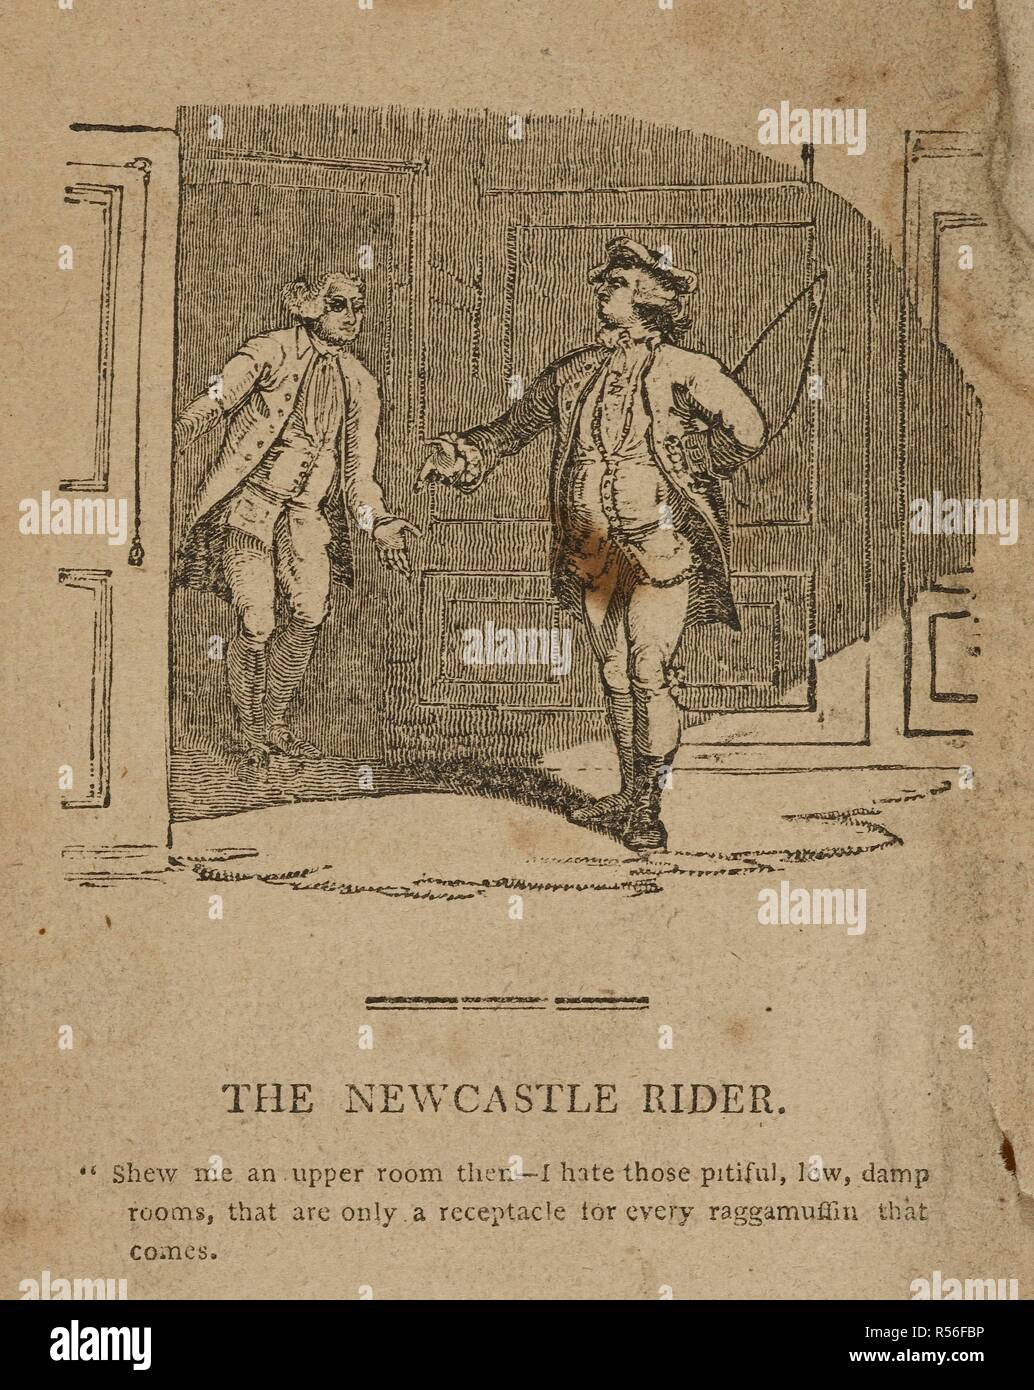 The Newcastle Rider confronting a man at an inn demanding a better room. [Ducks and Green Pease; or the Newcastle Rider: a farce of one act [by J. Lund], founded in fact. To which is added The cure for a drunkard; a tale in verse. (The Newcastle Rider; or Ducks and Green Pease, a tale [in verse].)]. Newcastle-on-Tyne : J. Mitchell, [1820?]. Source: 11779.a.24, frontispiece. Language: English. Stock Photo